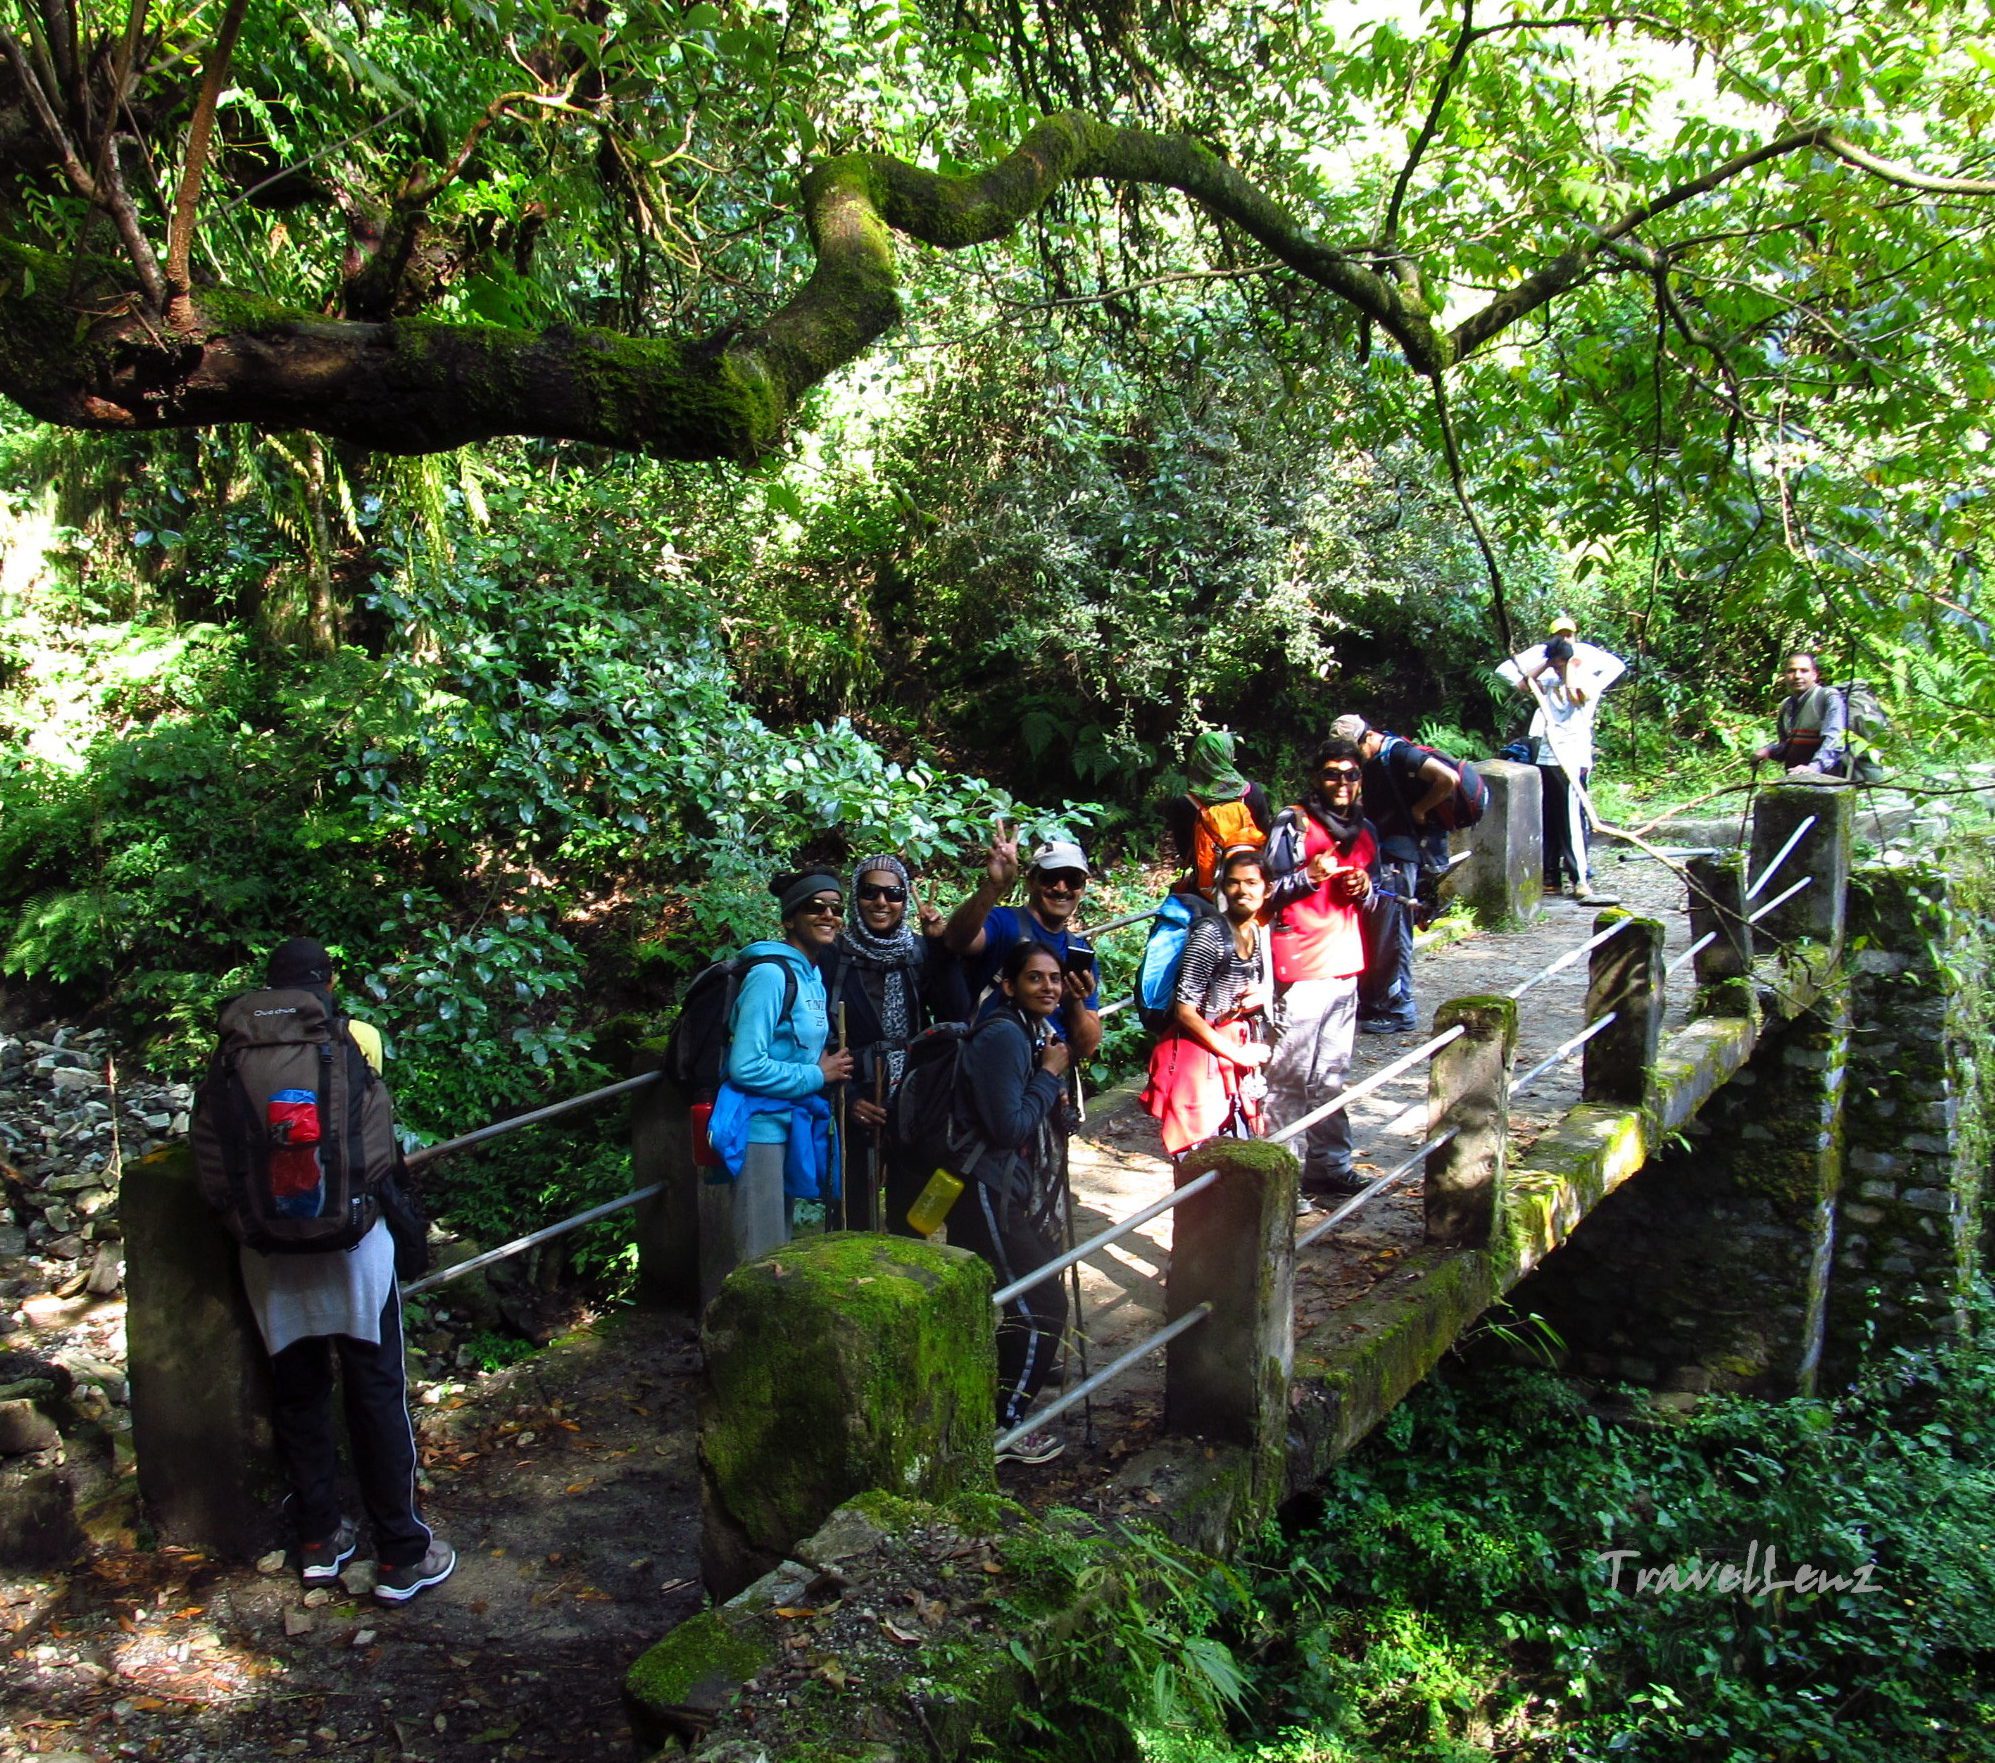 Trekkers pose on a stone bridge in the middle of a forest